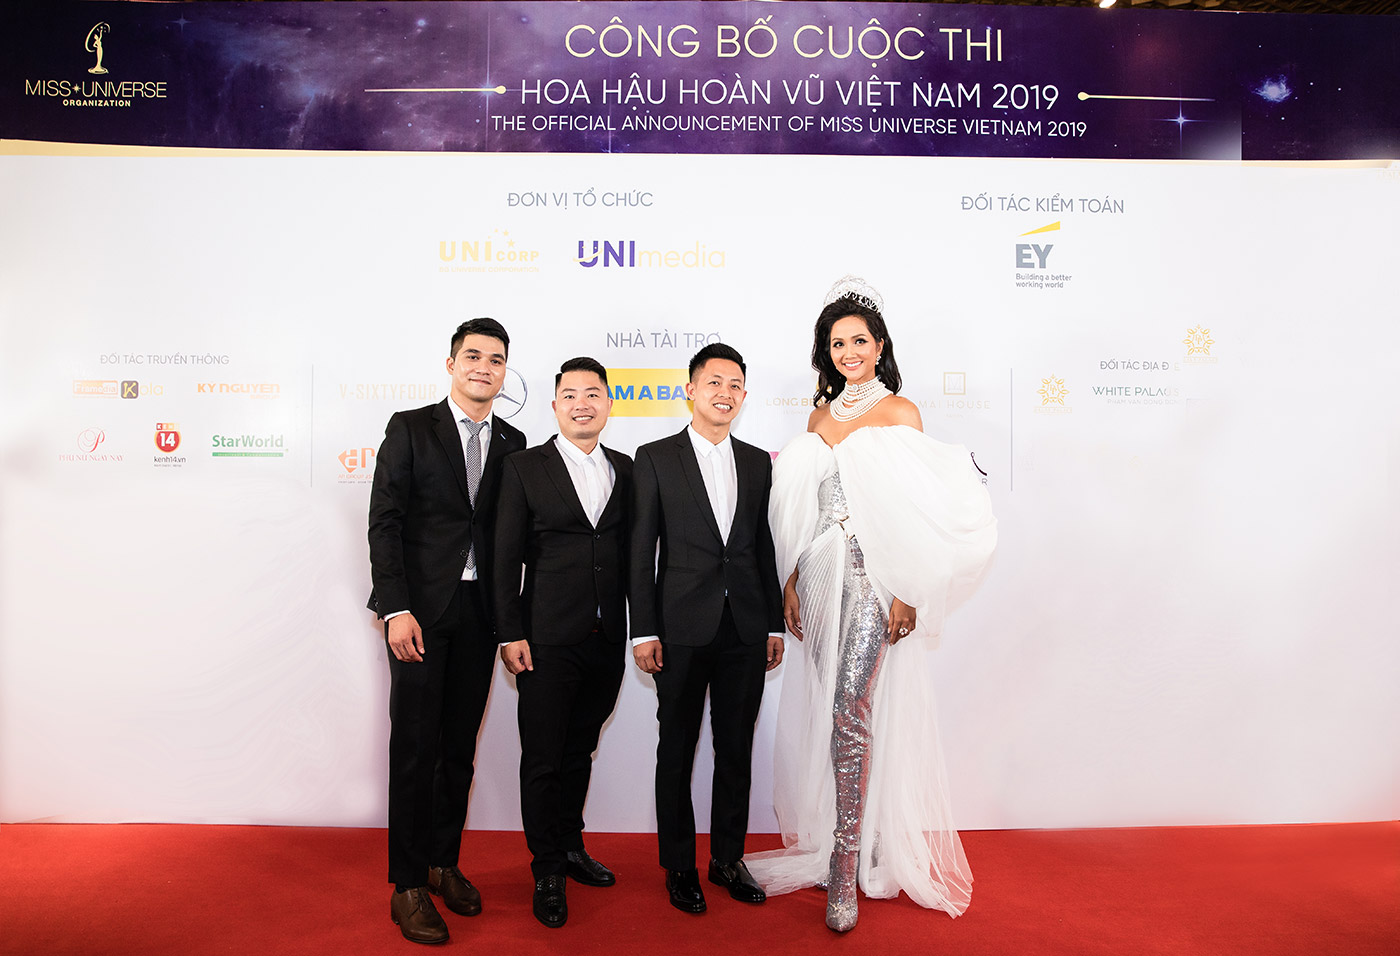 Miss Universe Vietnam 2019 to apply blockchain technology for voting